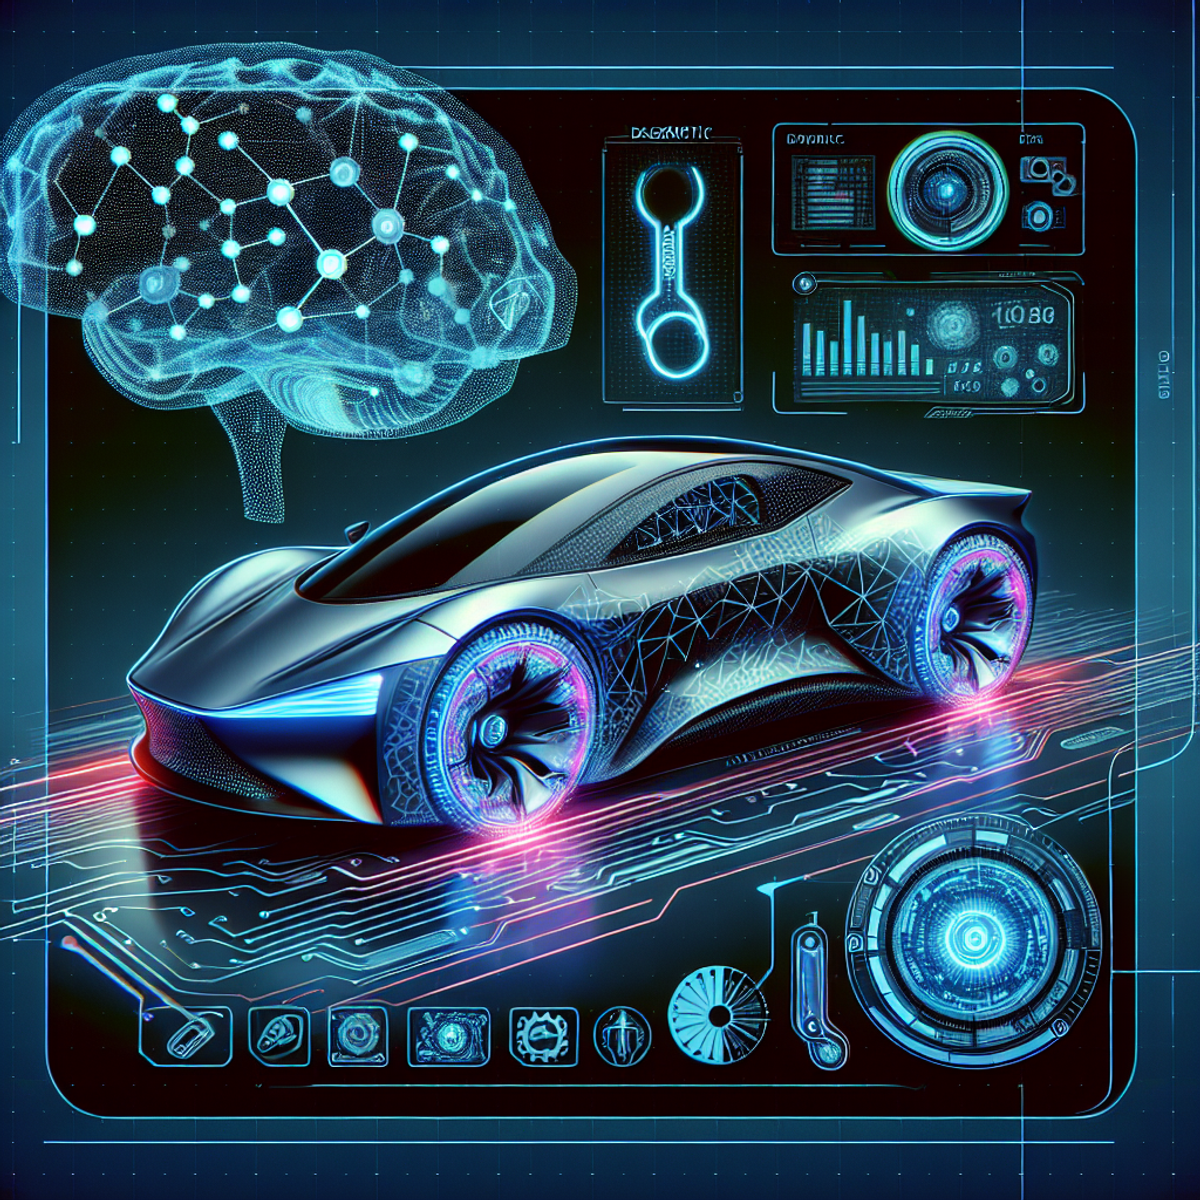 A futuristic car with abstract symbols and a diagnostic tool in the background.